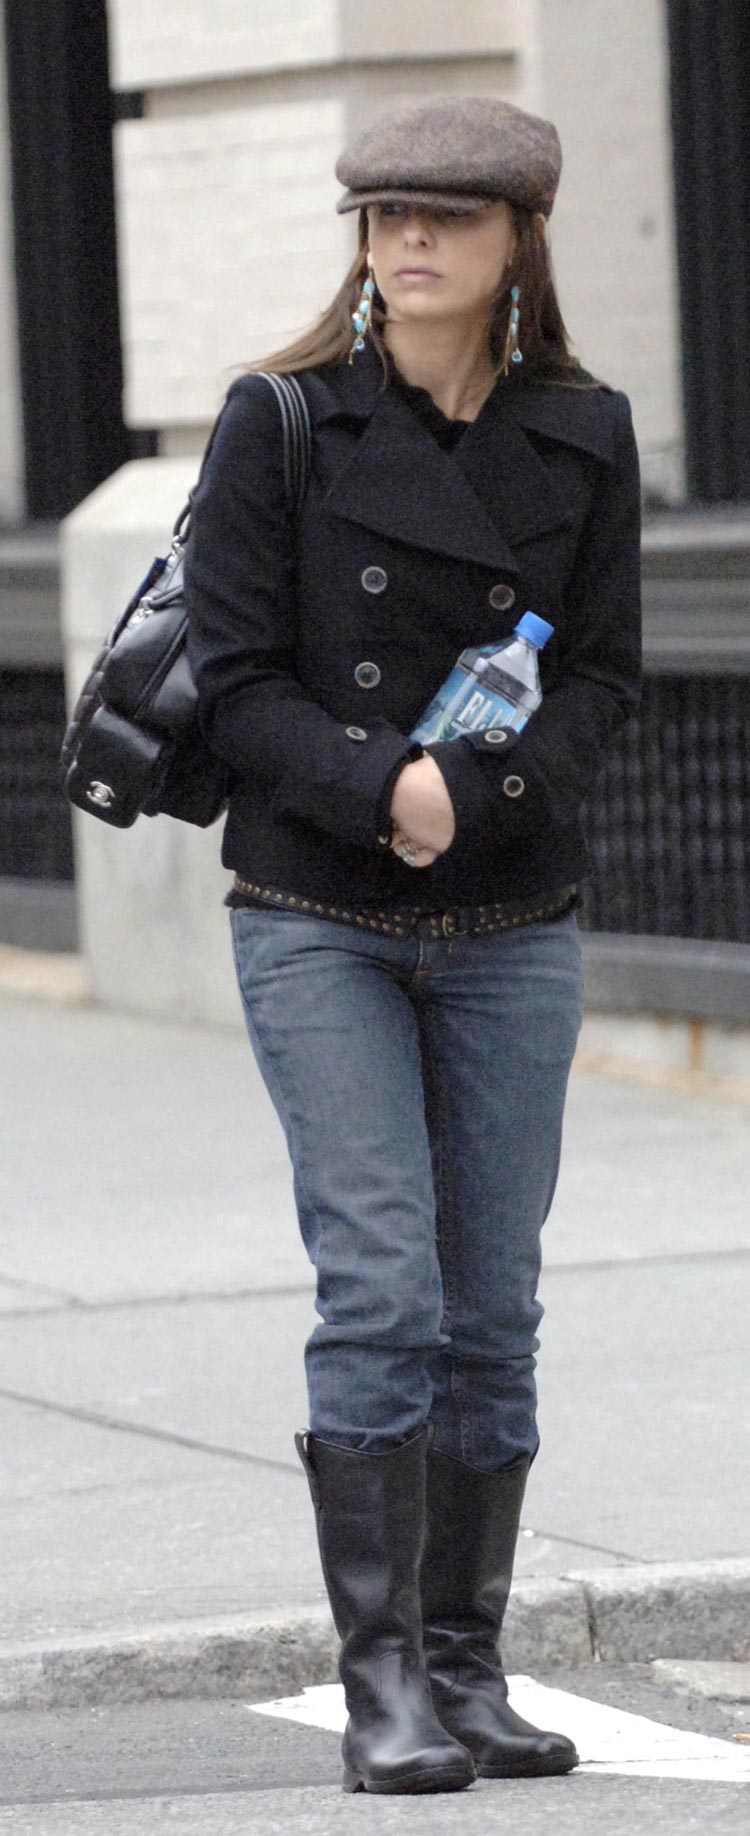 sarah-michelle-gellar-out-and-about-new-york-oct-2005-hq-01-0750.jpg